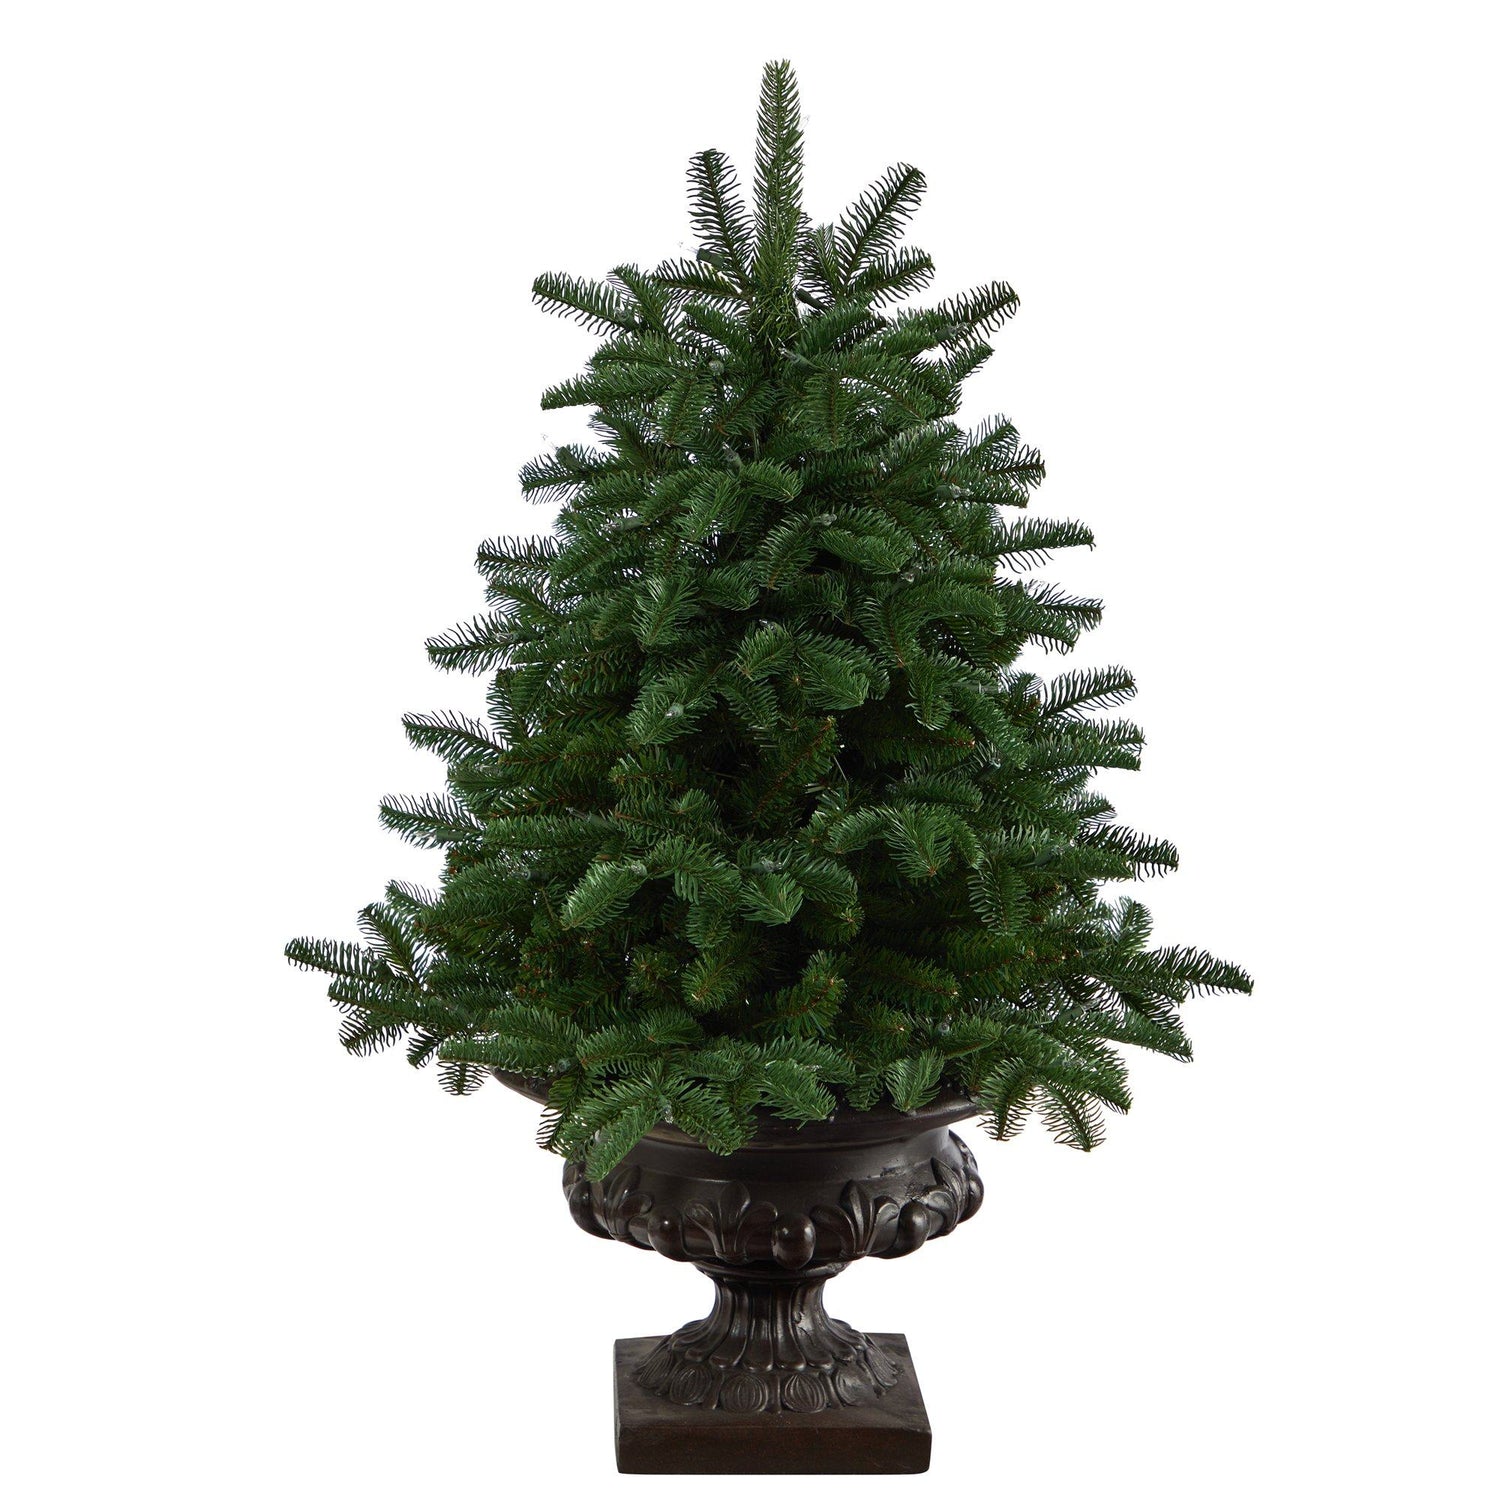 3.5’ South Carolina Spruce Artificial Christmas Tree with 100 White Warm Light and 458 Bendable Branches in Iron Colored Urn